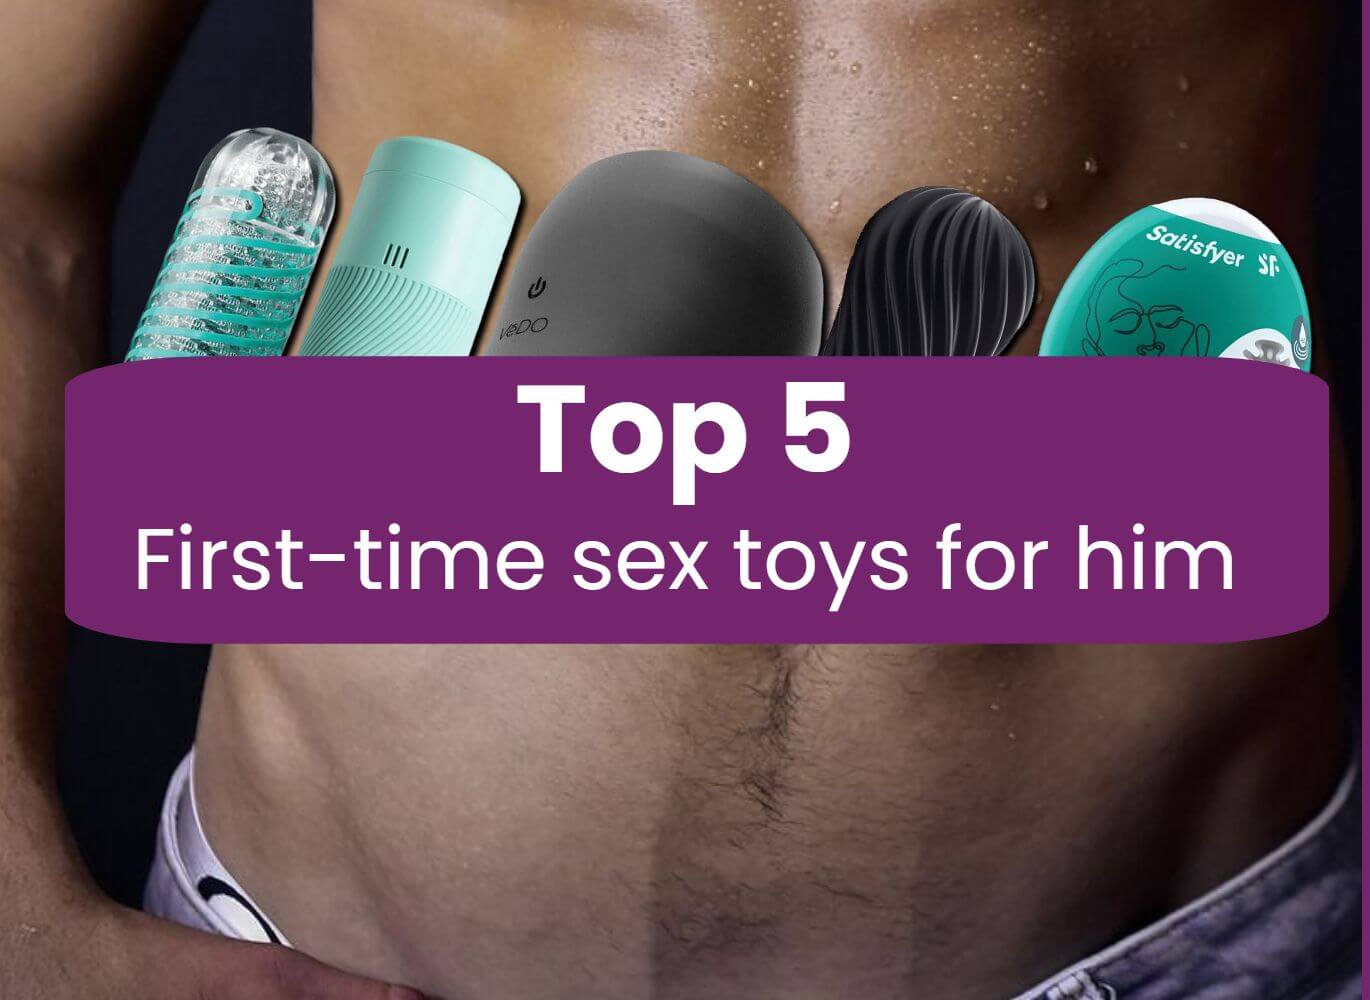 The Top 5 First-Time Sex Toys for Him